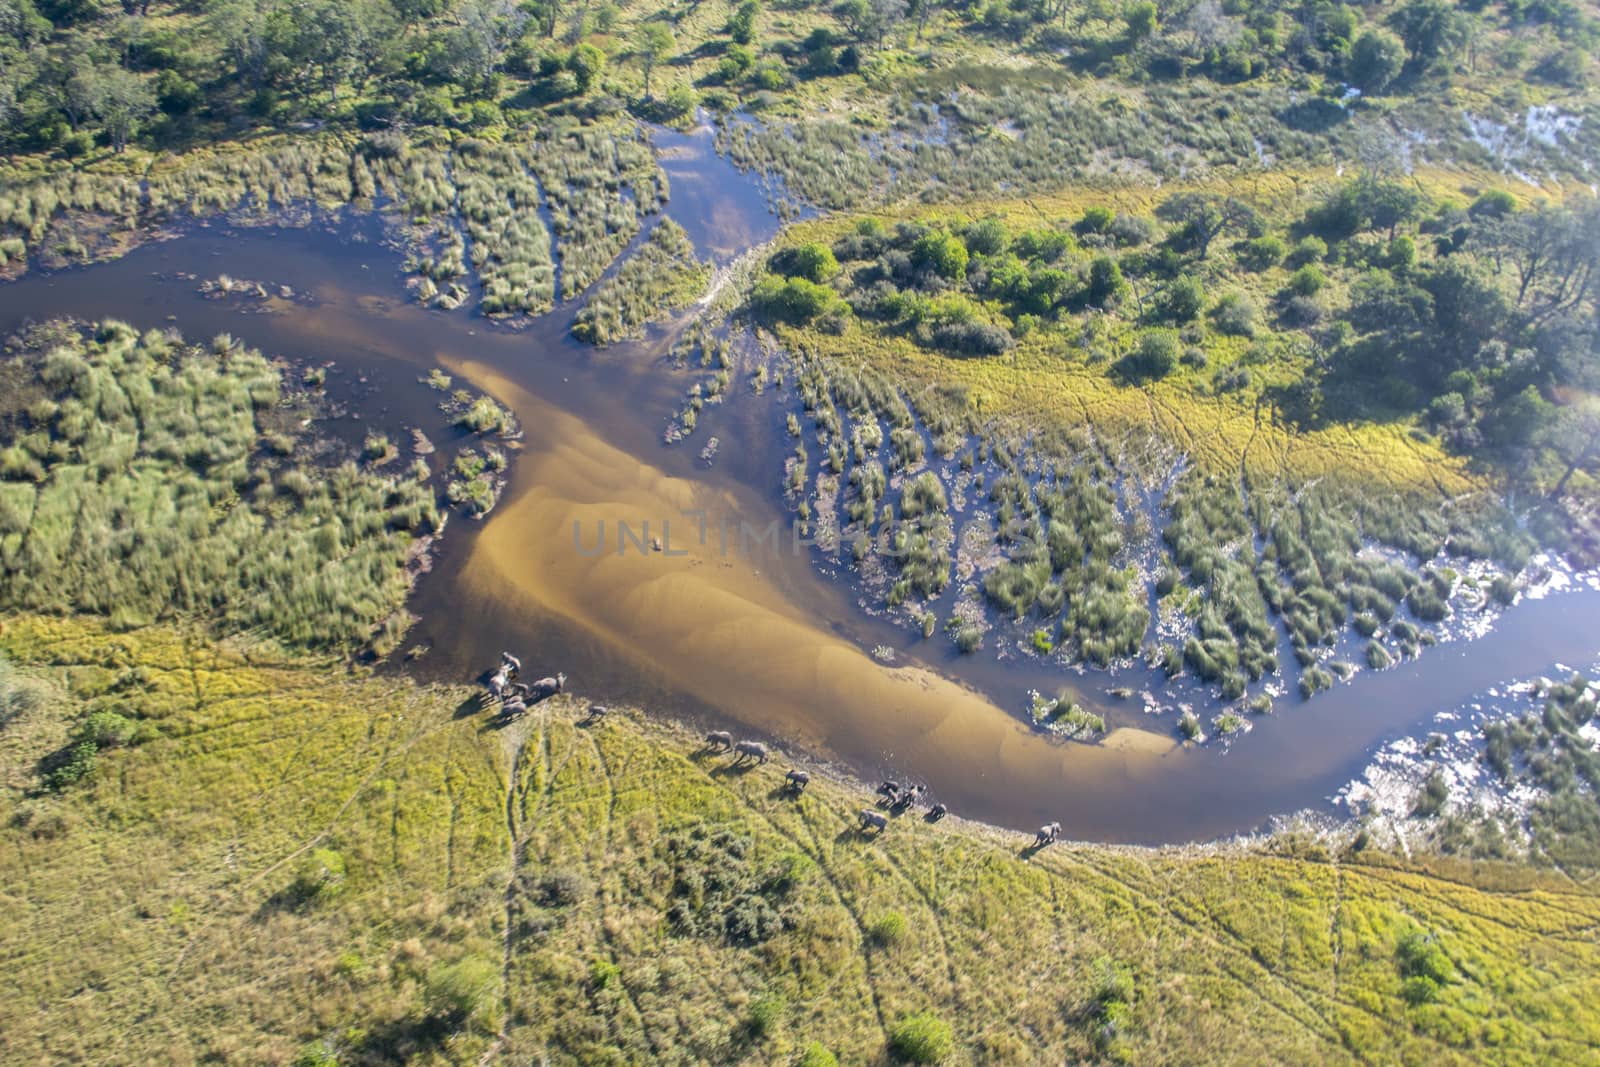 Aerial view at Moremi national park in Botswana, Africa by kb79